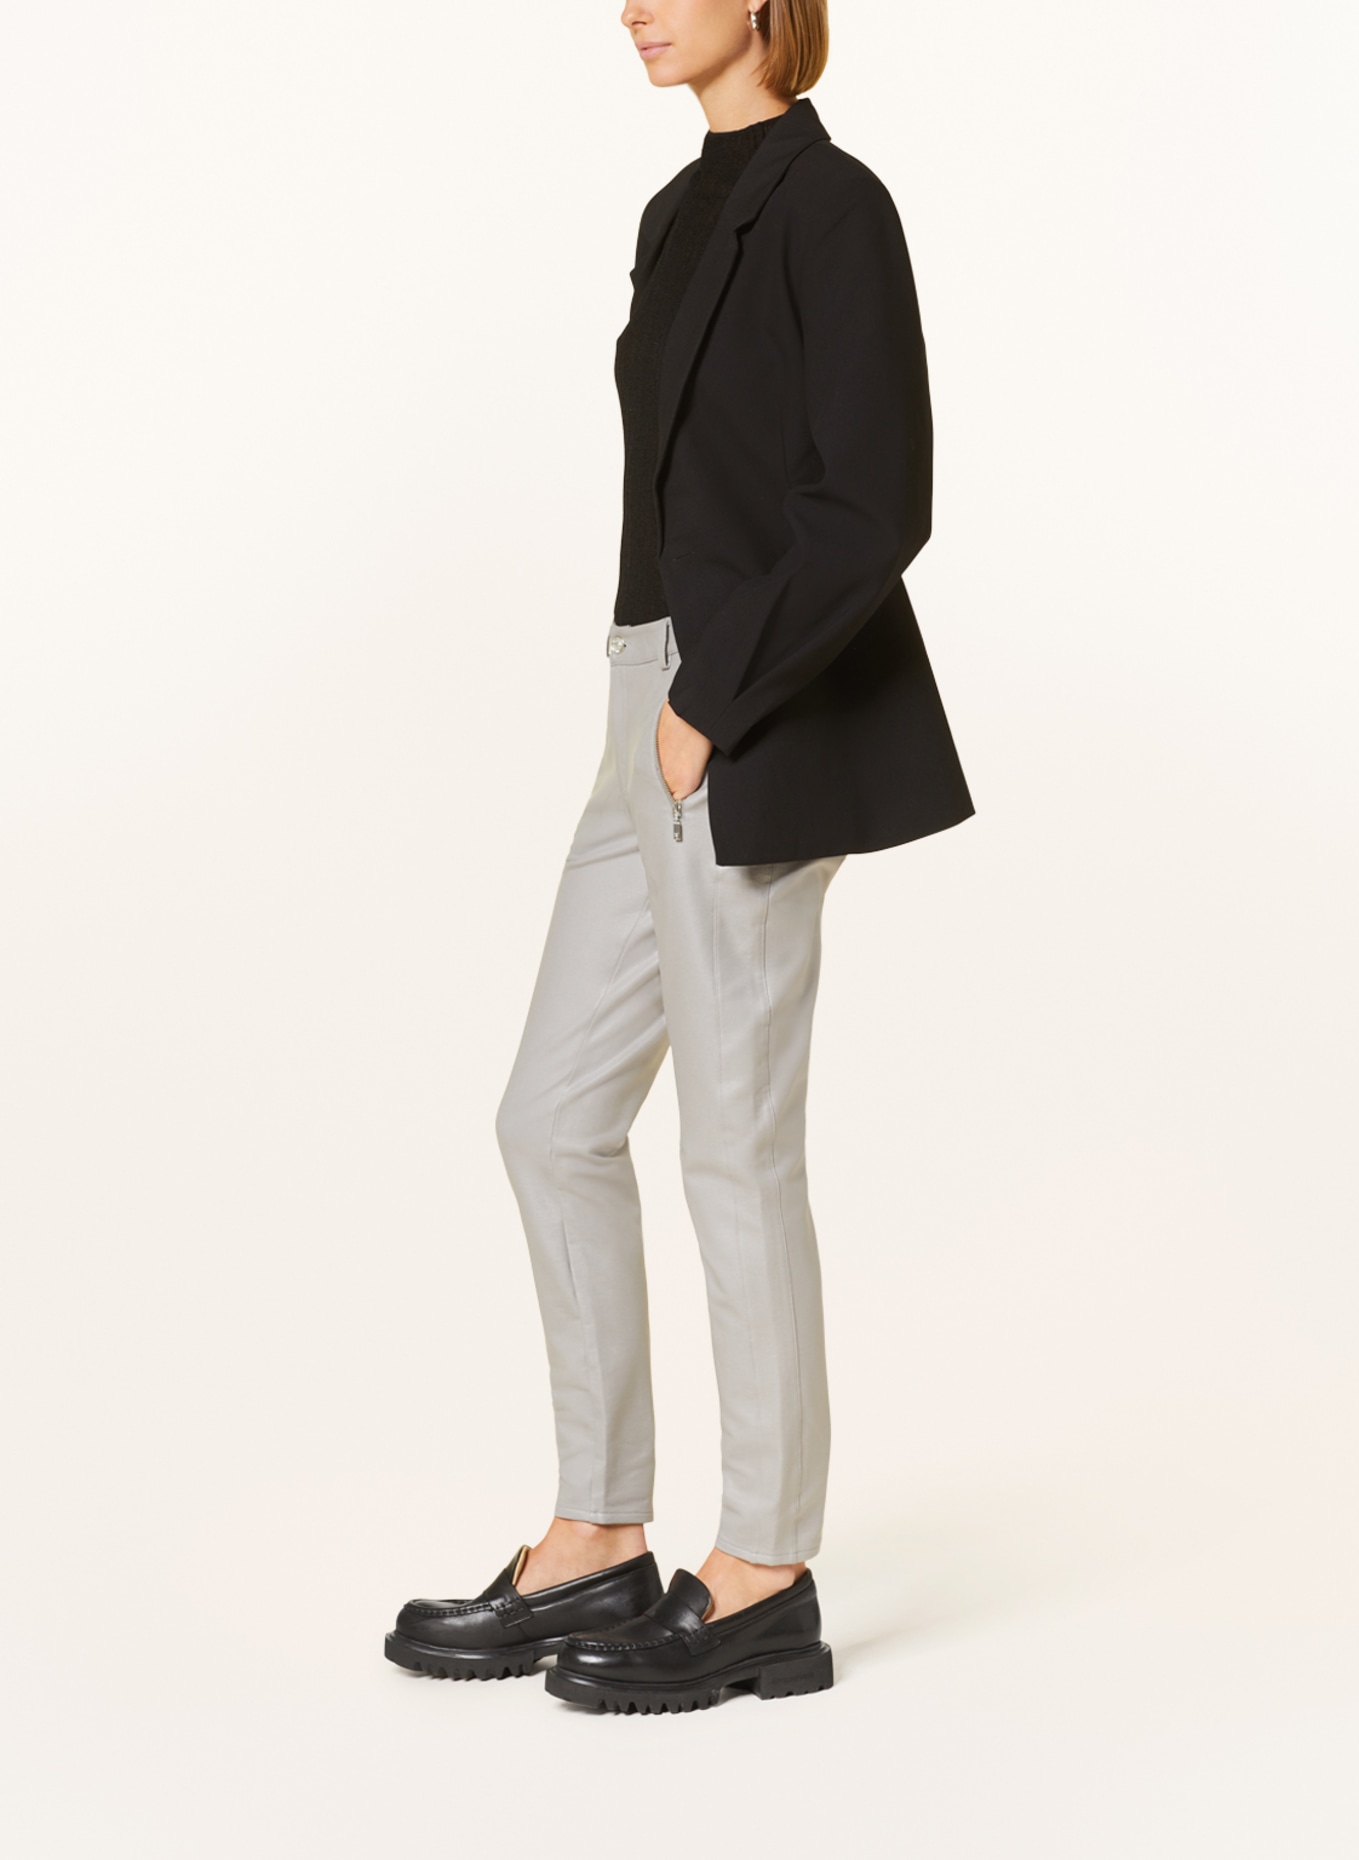 monari Pants in leather look, Color: LIGHT GRAY (Image 4)